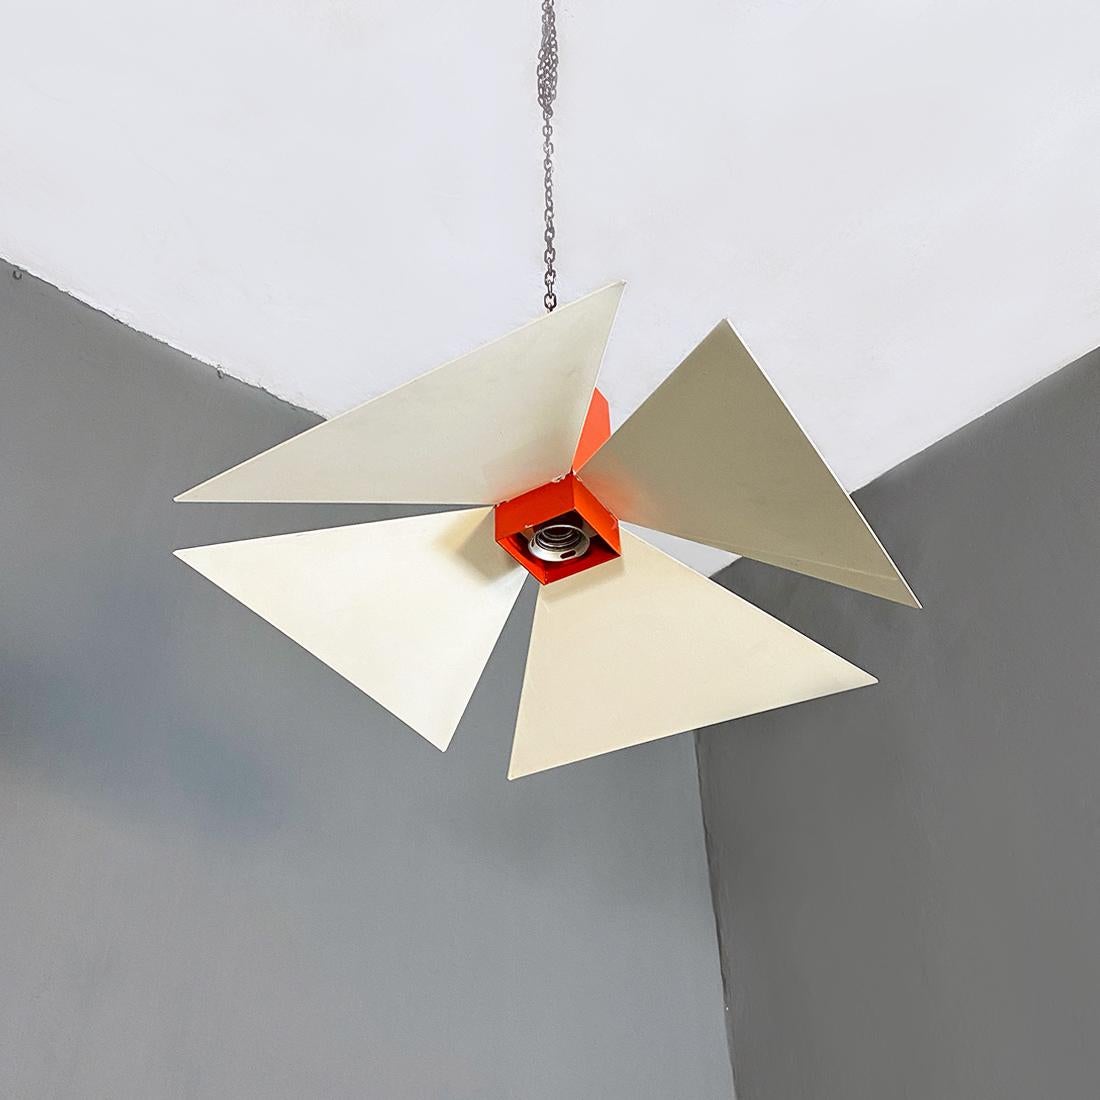 Italian post modern orange and white metal chandelier, 1980s
Chandelier with central part in red metal containing the lamp holder and diffuser in white metal, formed by four segments.
1980 approx.
Good general condition, some skipped color spots.